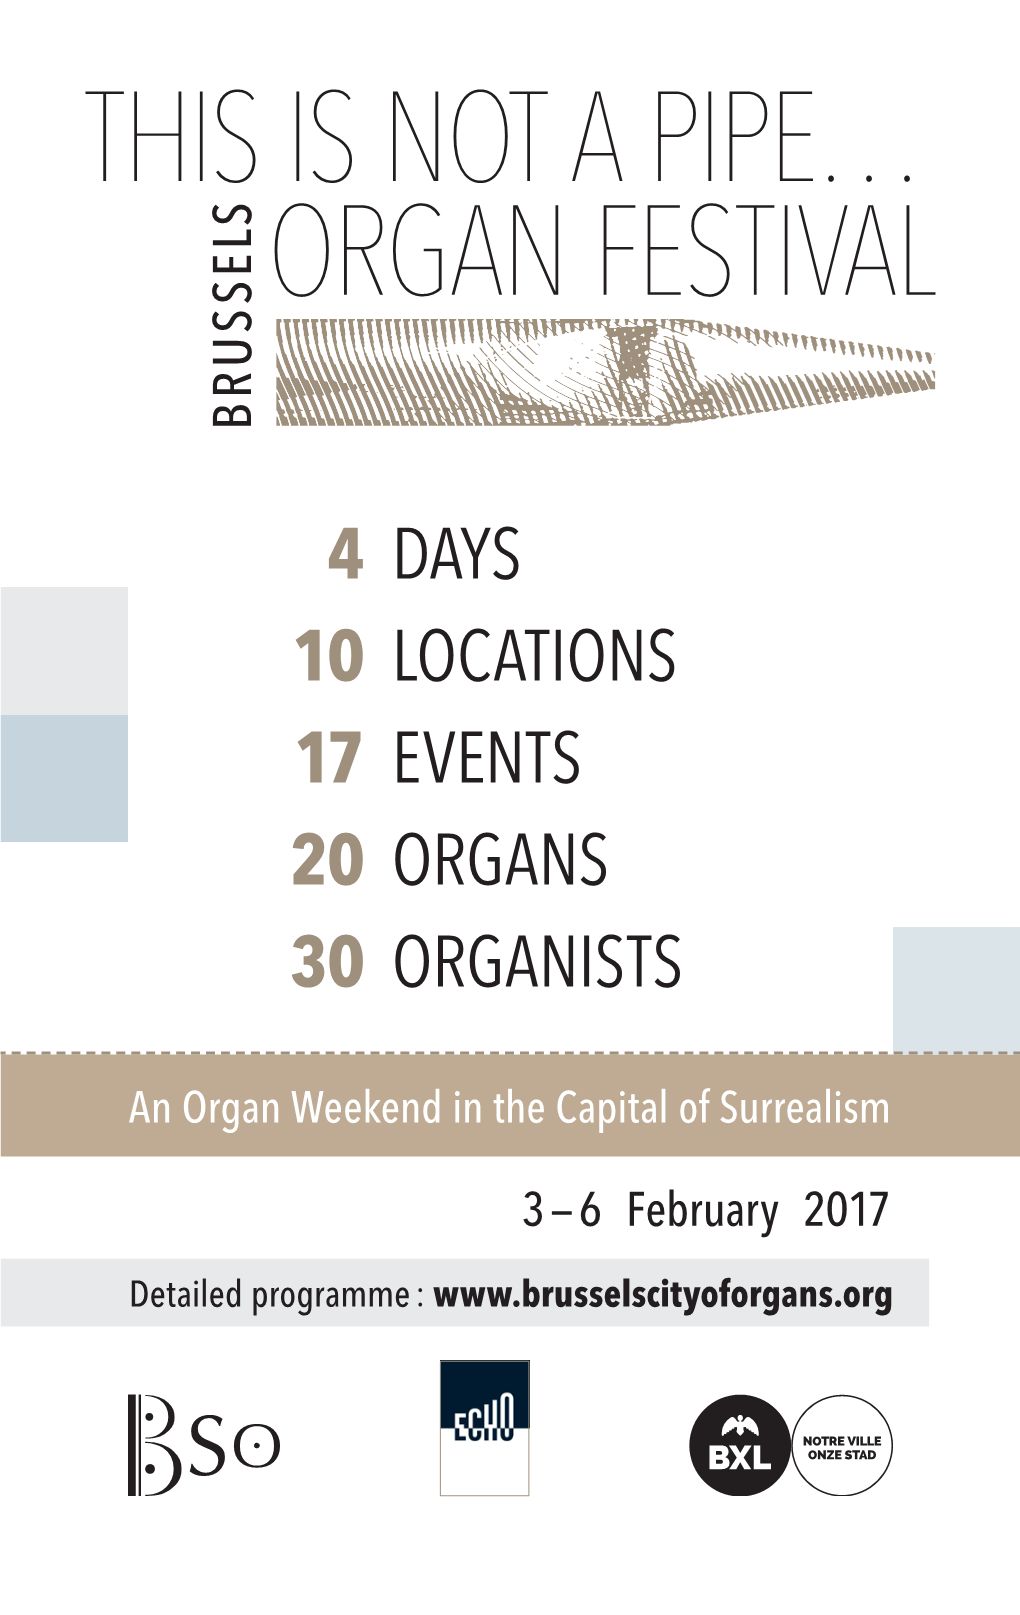 4 Days 10 Locations 17 Events 20 Organs 30 Organists